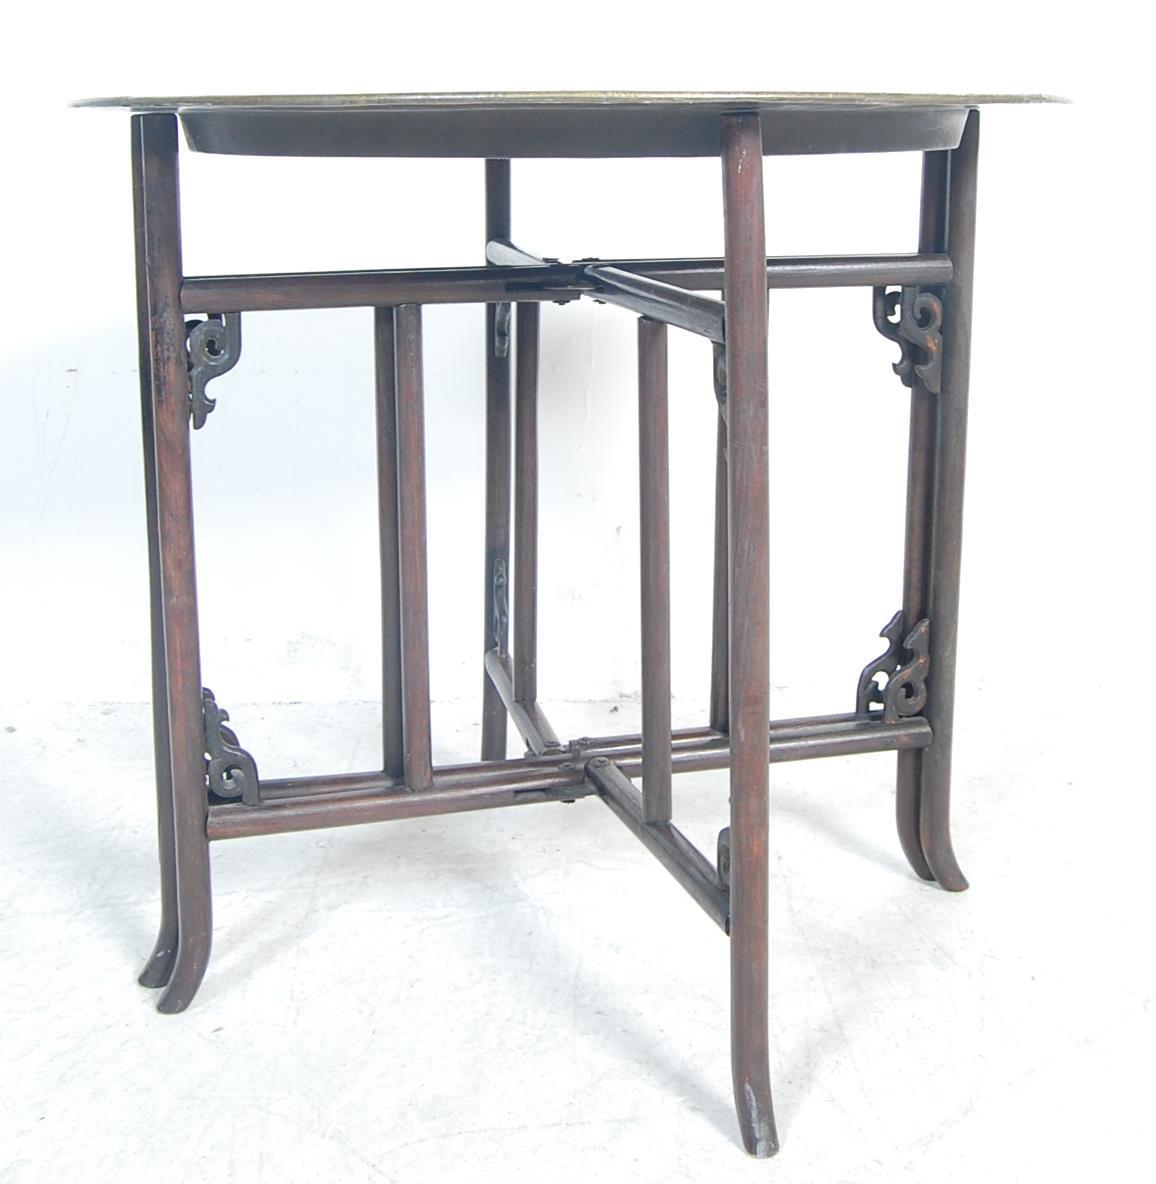 ANTIQUE EARLY 20TH CENTURY BENARES TABLE - Image 3 of 7